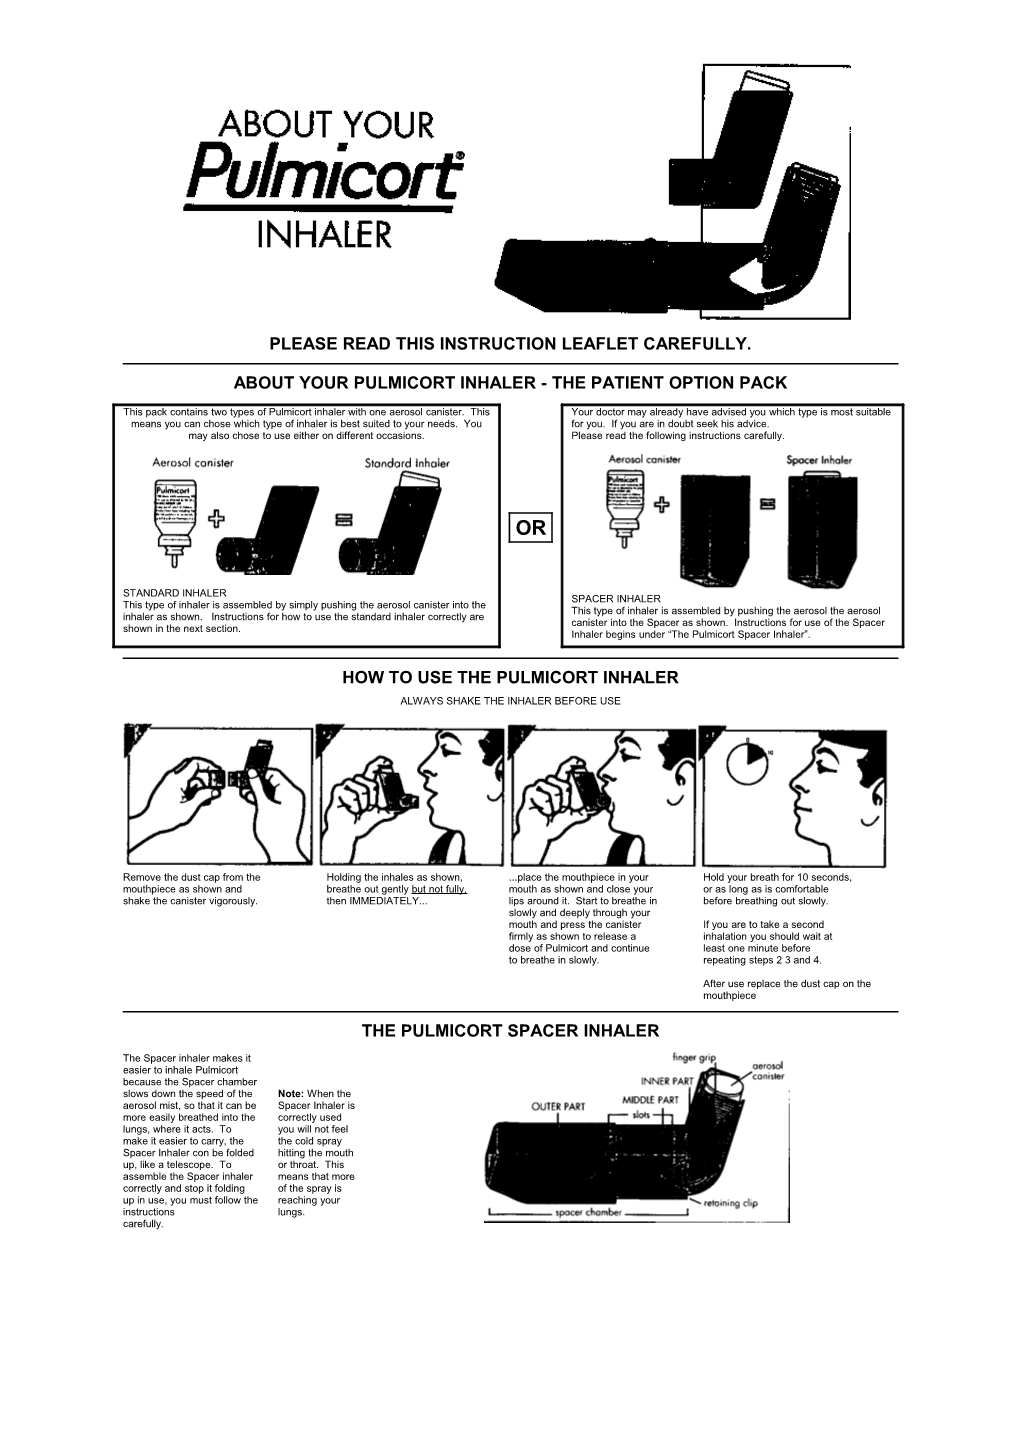 How to Assemble Your Pulmicort Spacer Inhaler